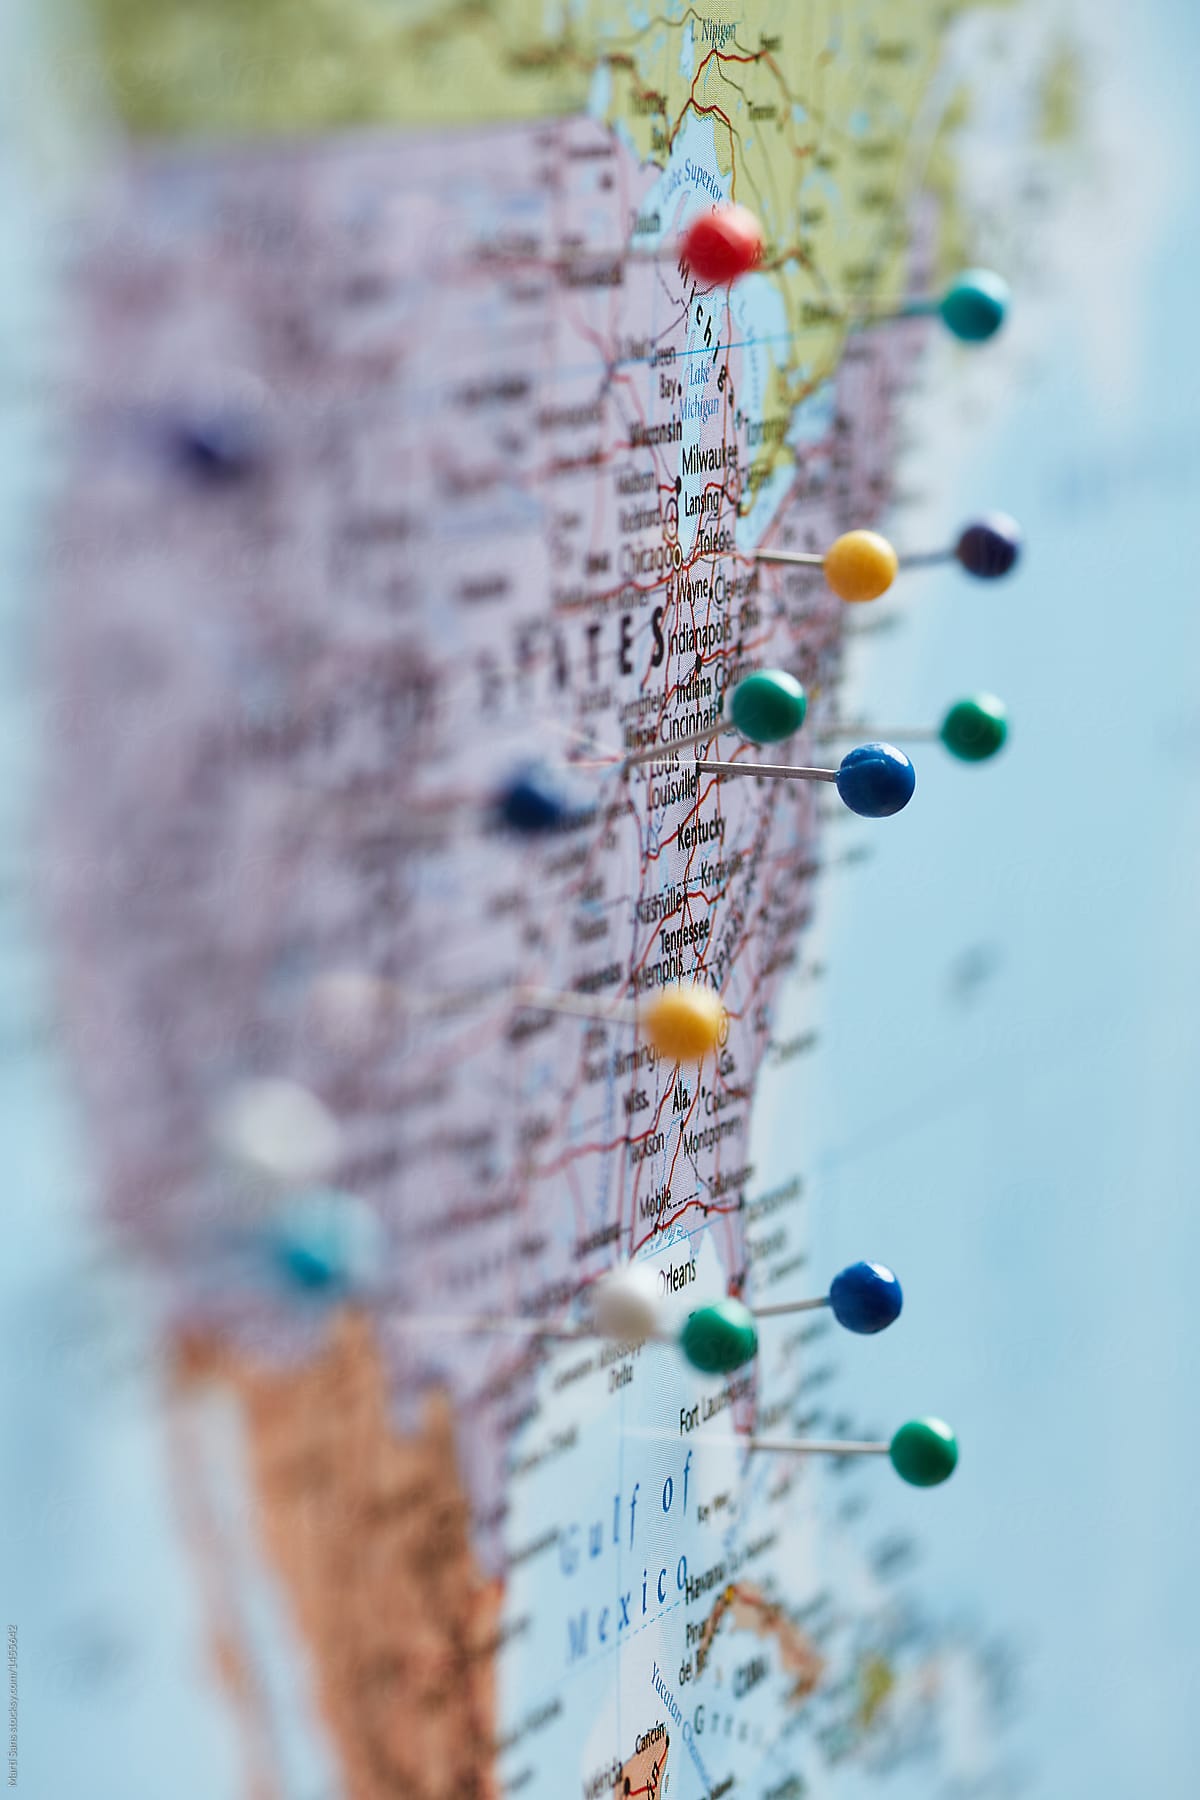 North America marked with colorful push pins.